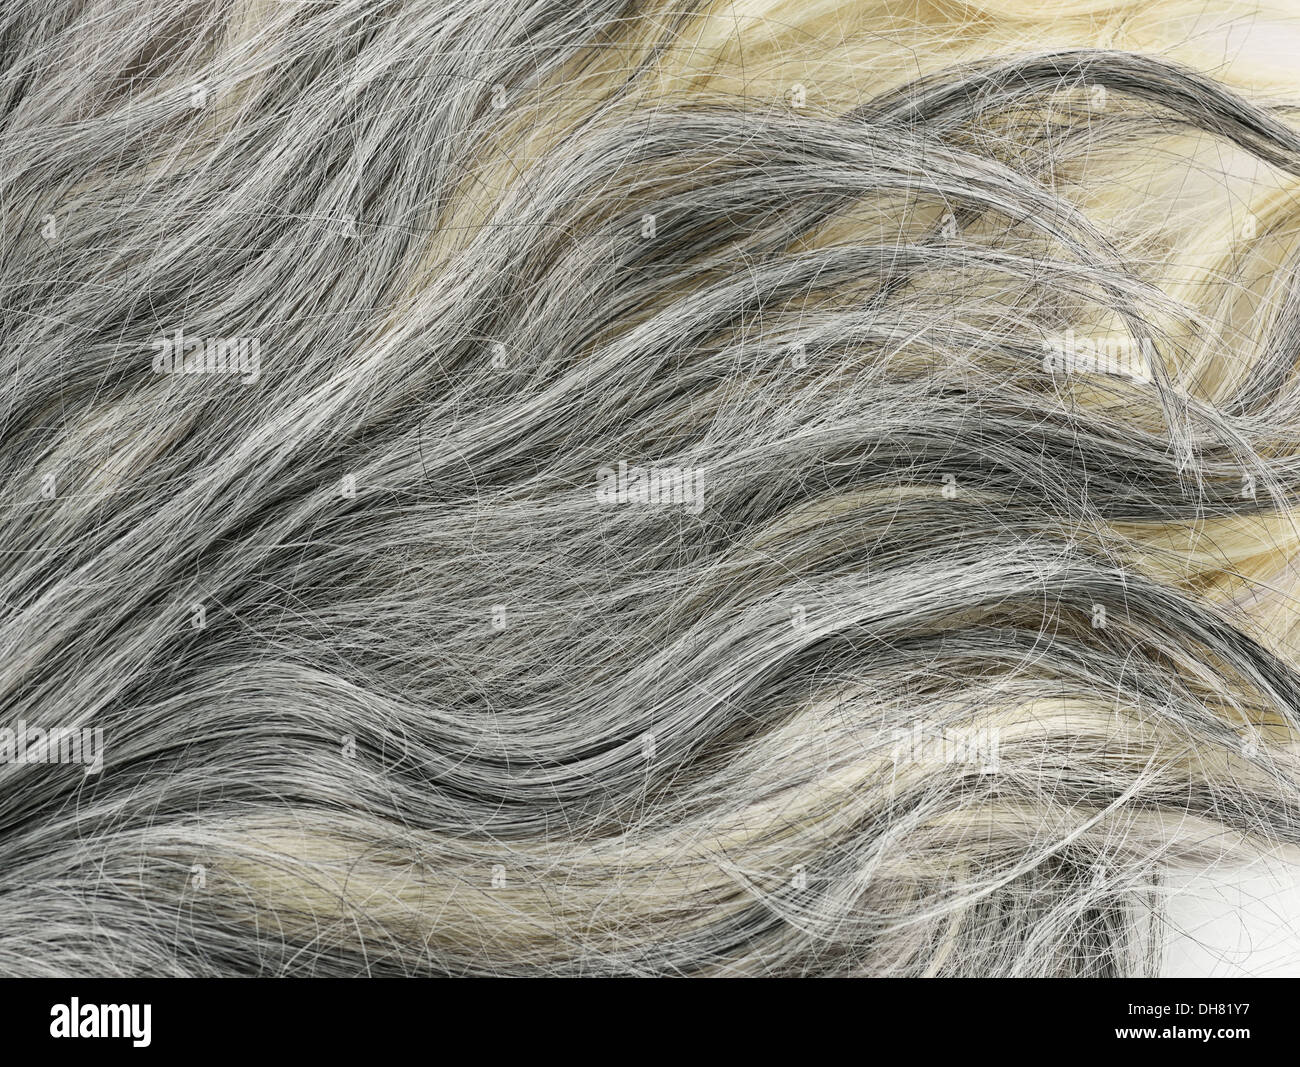 Grey Hair Texture For Background Stock Photo